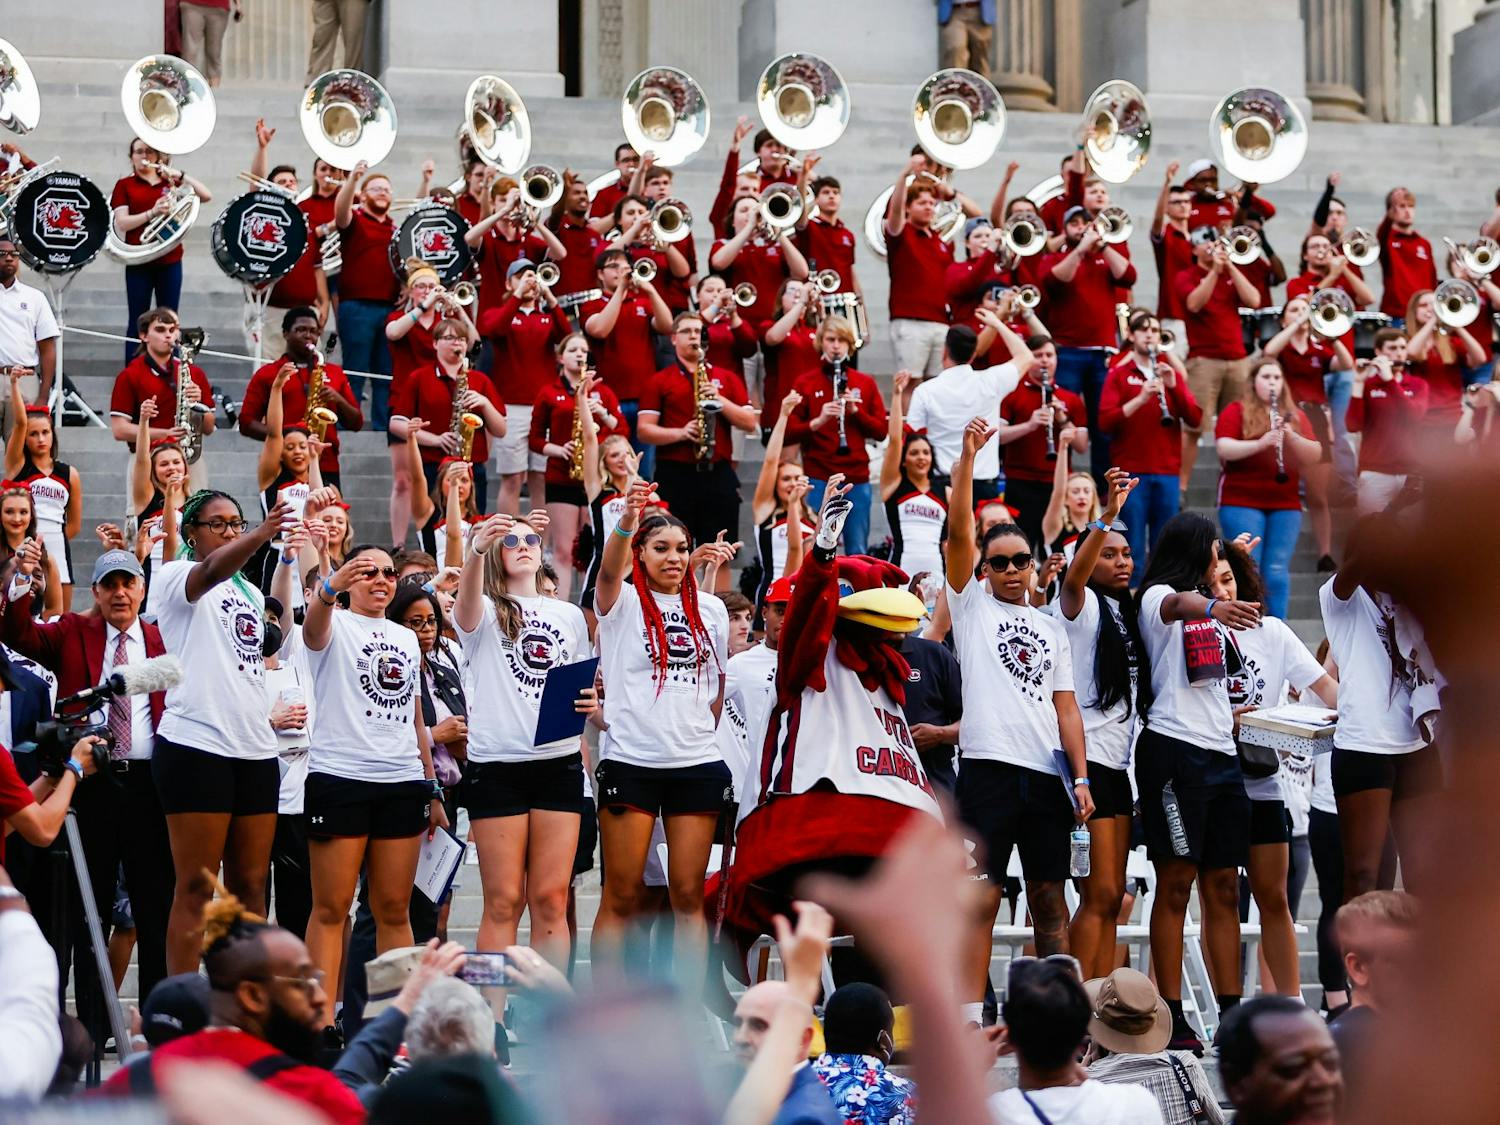 The Women’s Basketball teams “raise their cups” as the USC alma mater plays on April 13, 2022, after a parade in honor of the team’s national championship win. 